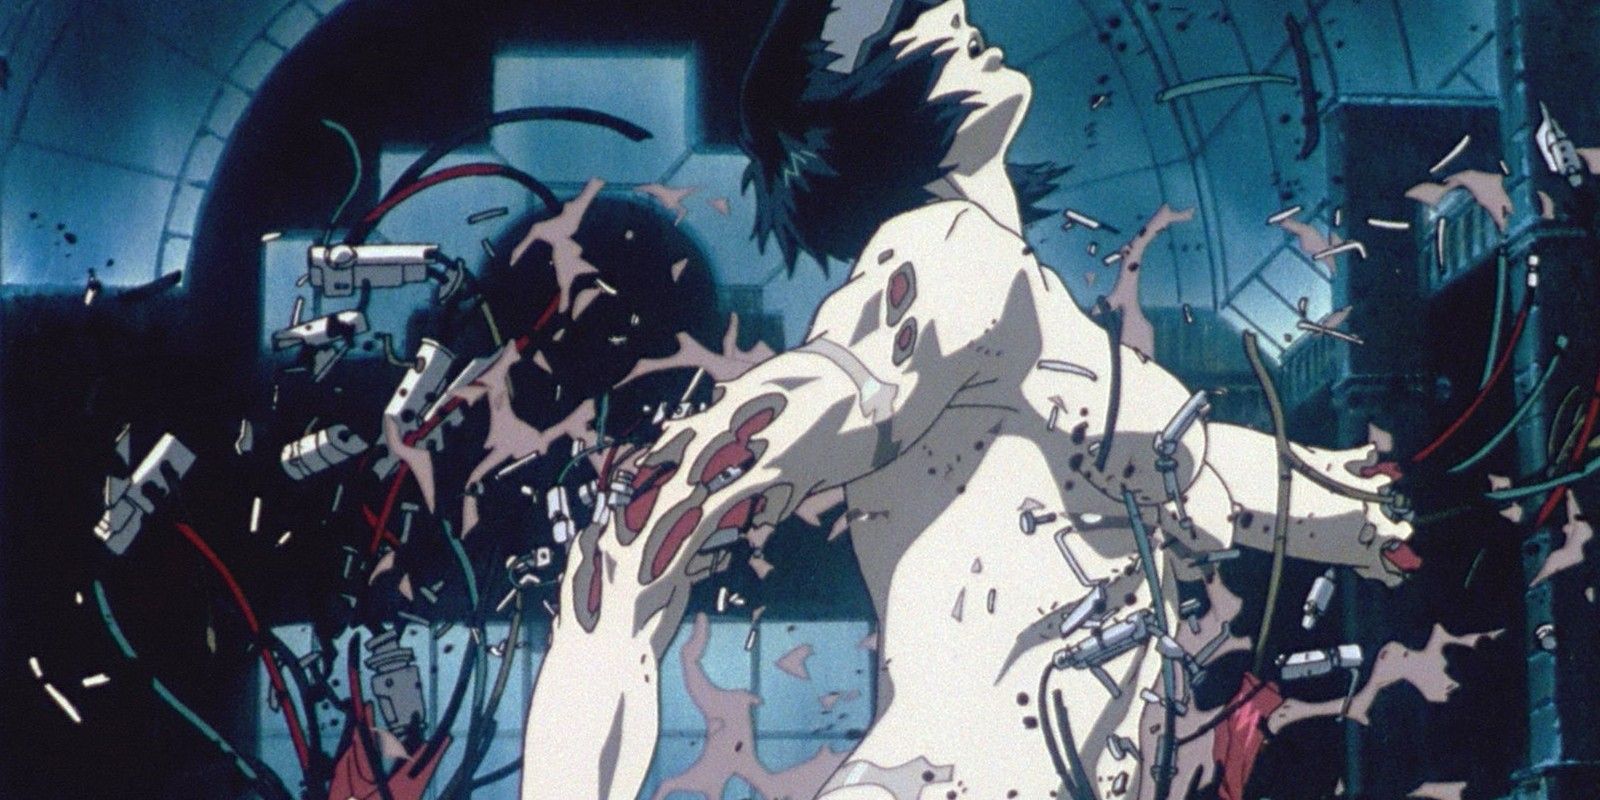 Best of Ghost in the shell nudity